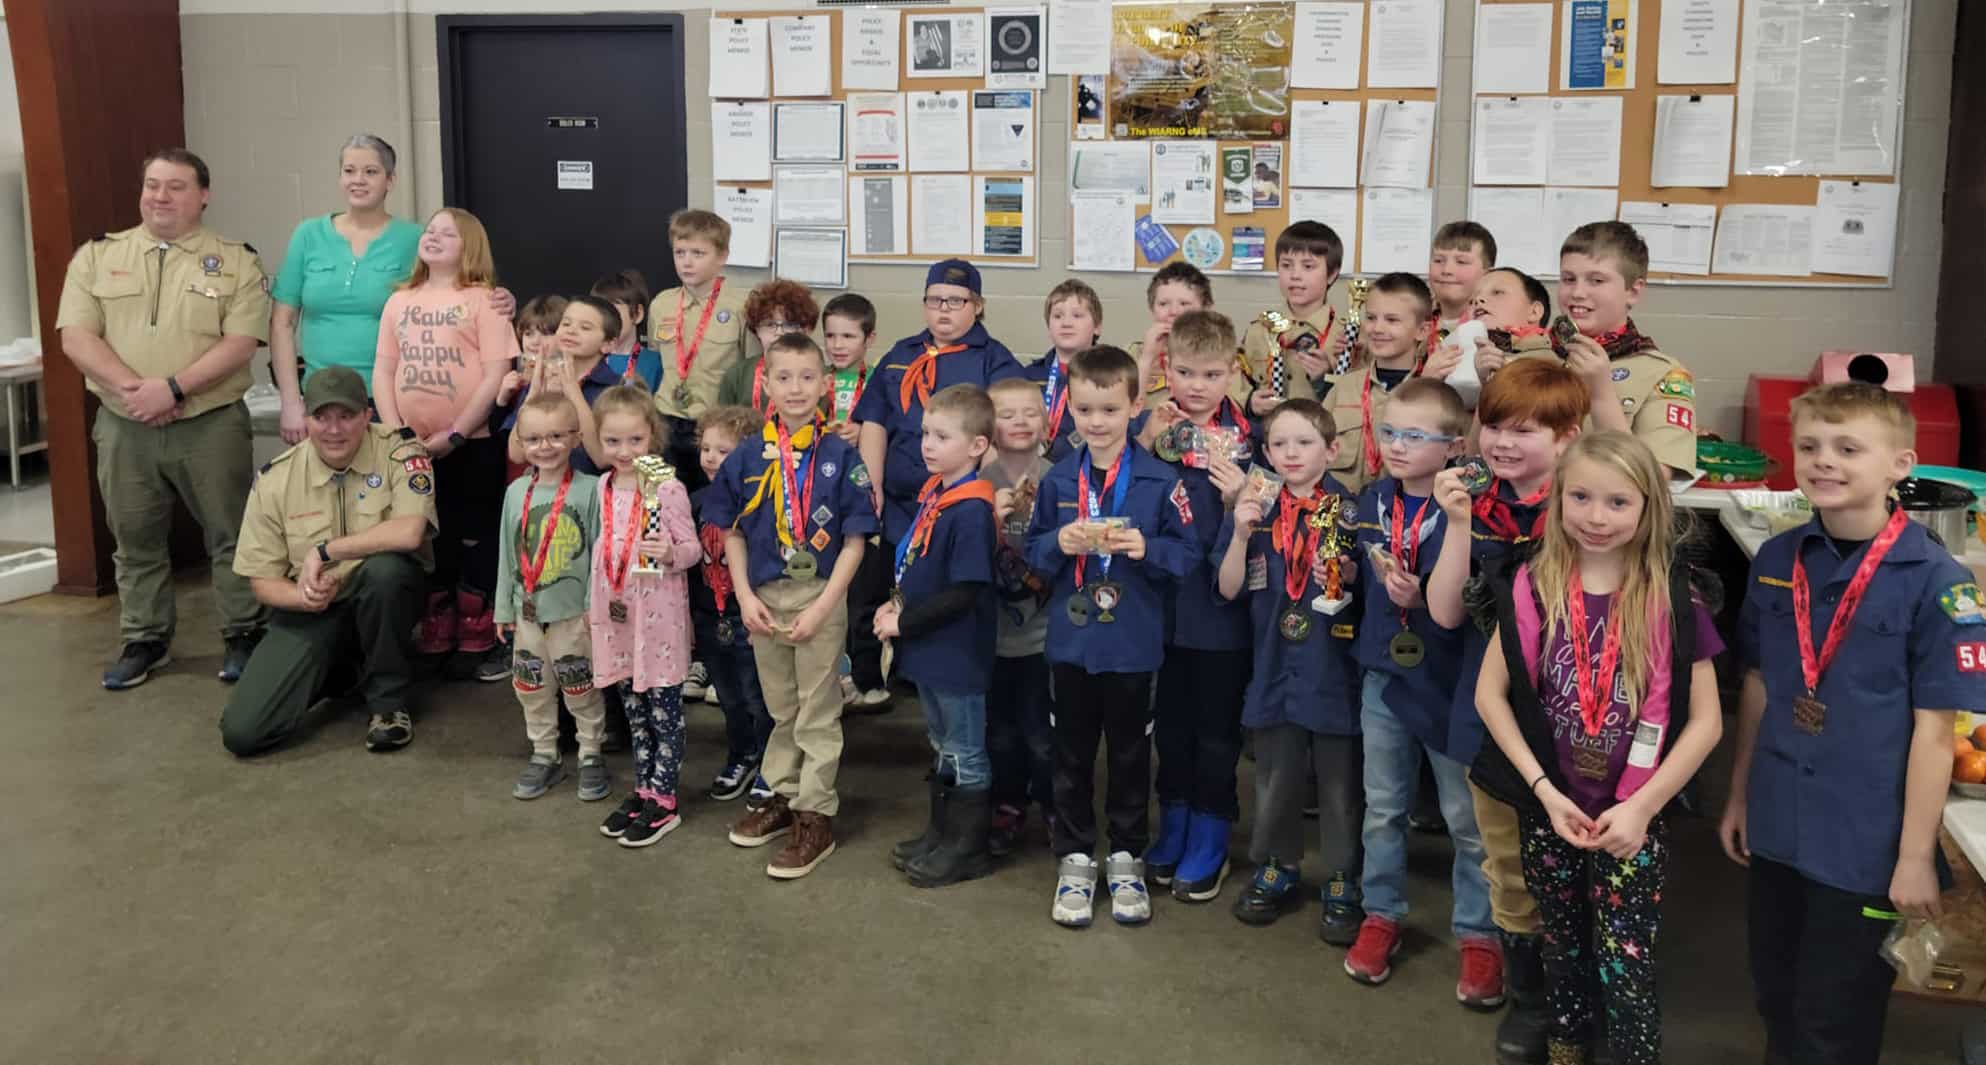 Tomahawk Cub Scouts hold annual Pinewood Derby Race, Cake Bake-Off